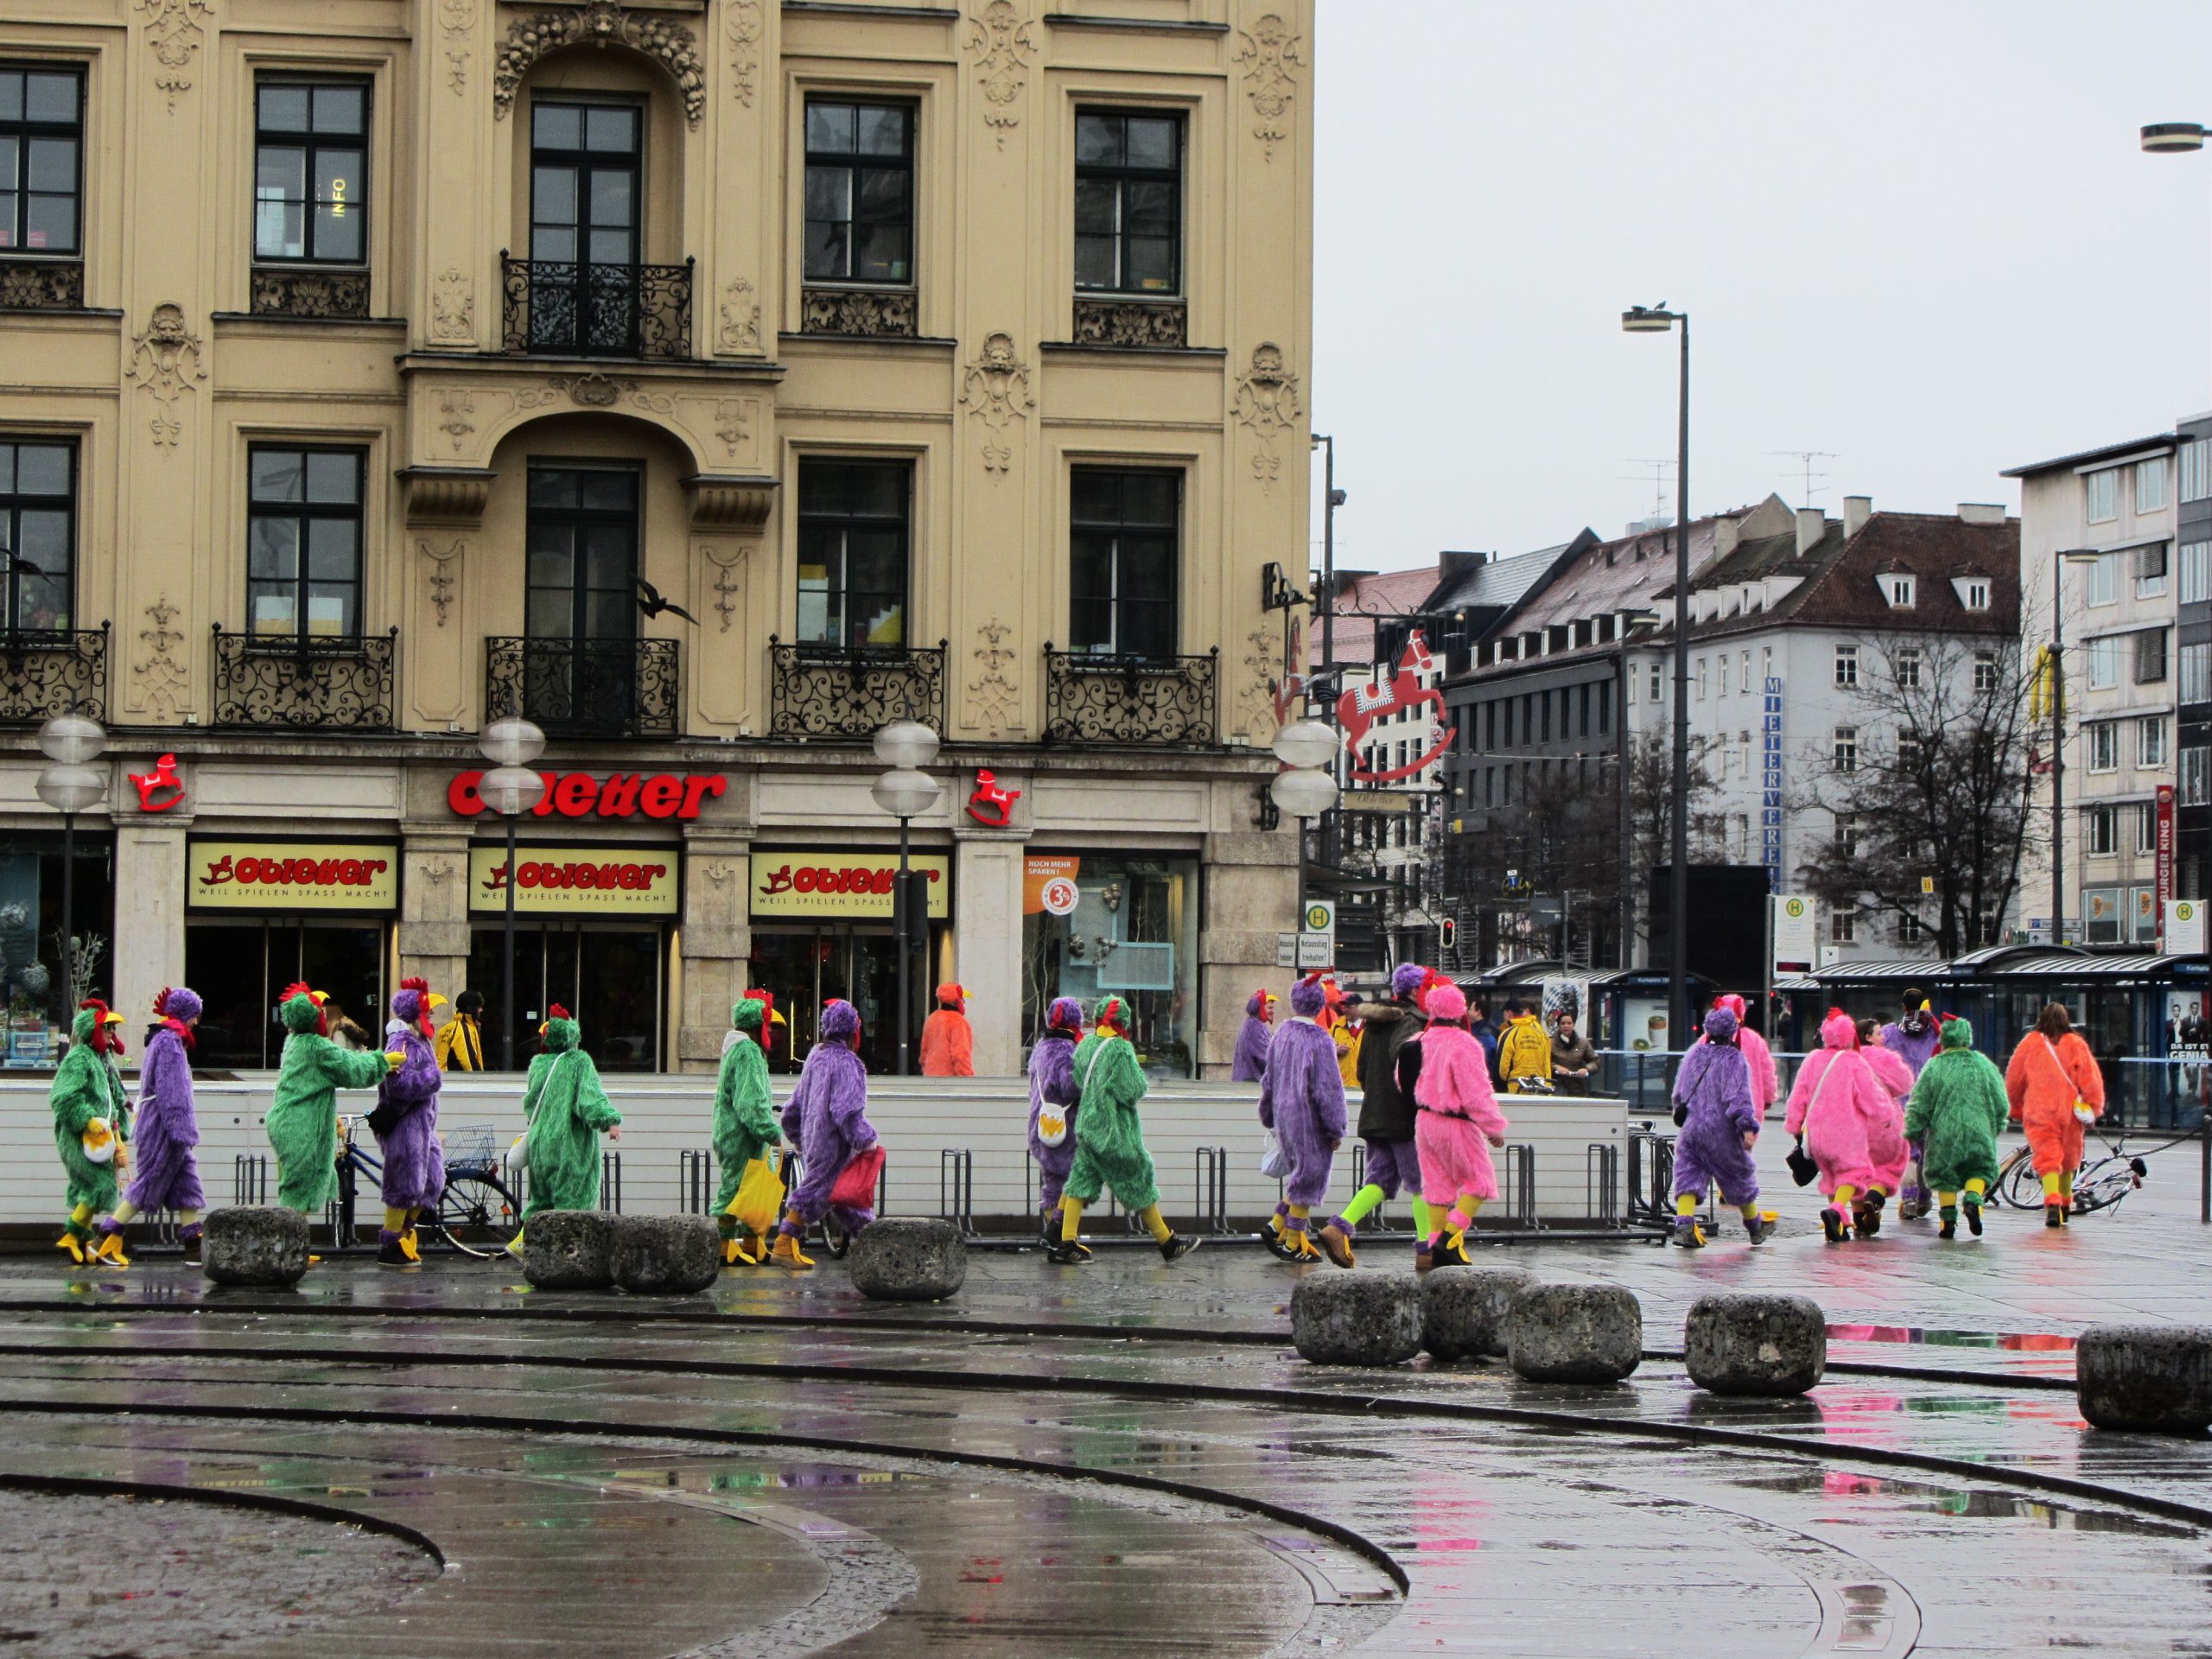 Group of people in Munich's historical center randomly dressed as stuffed animals.